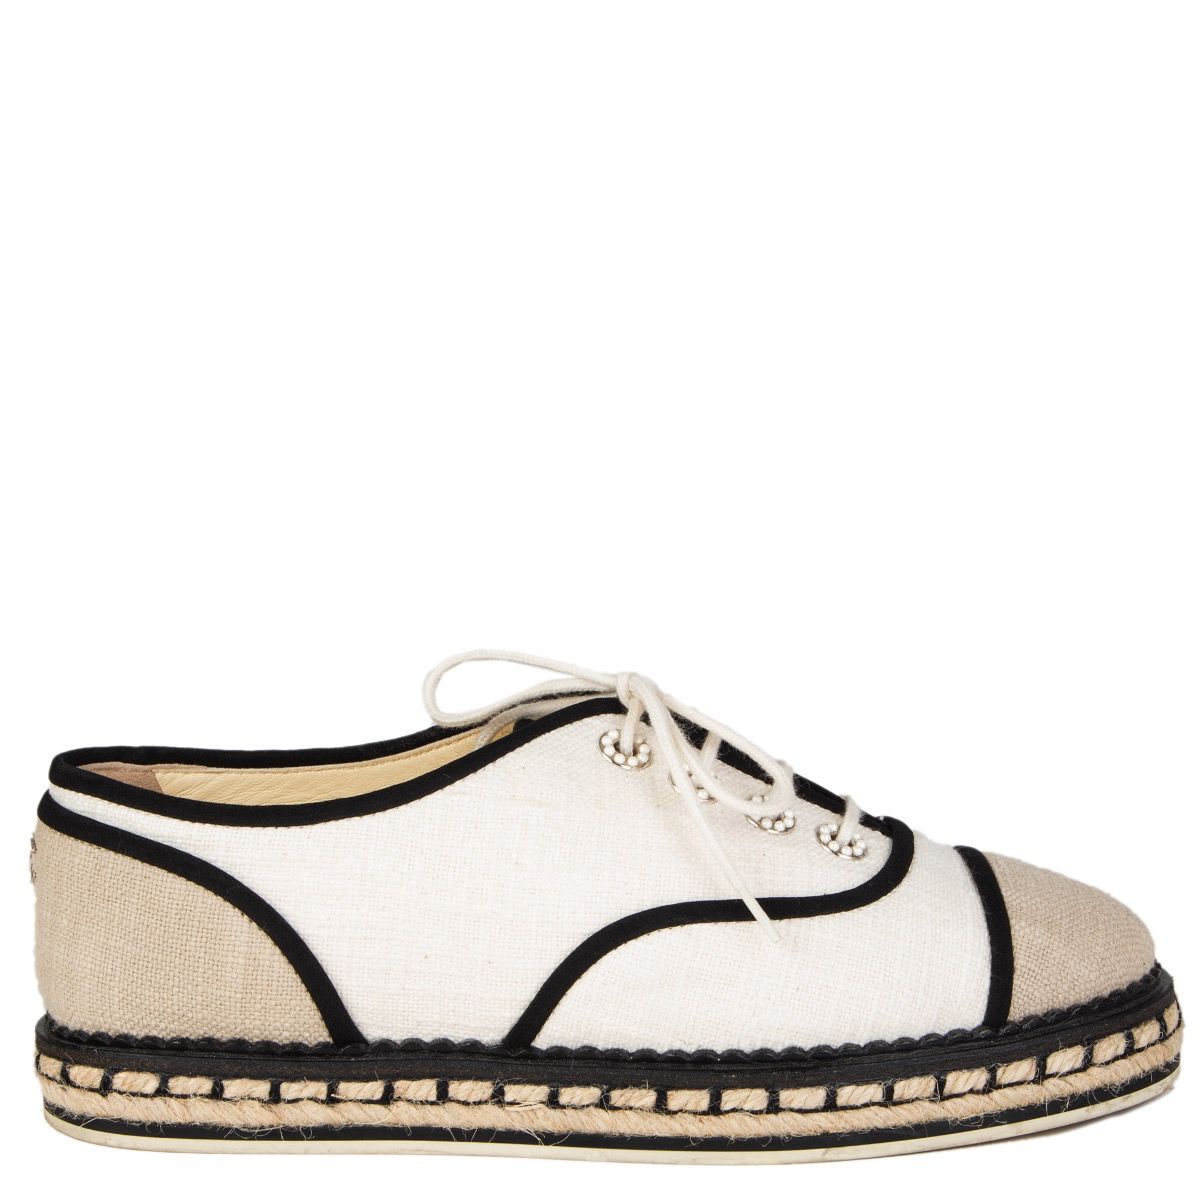 chanel white leather espadrilles 8